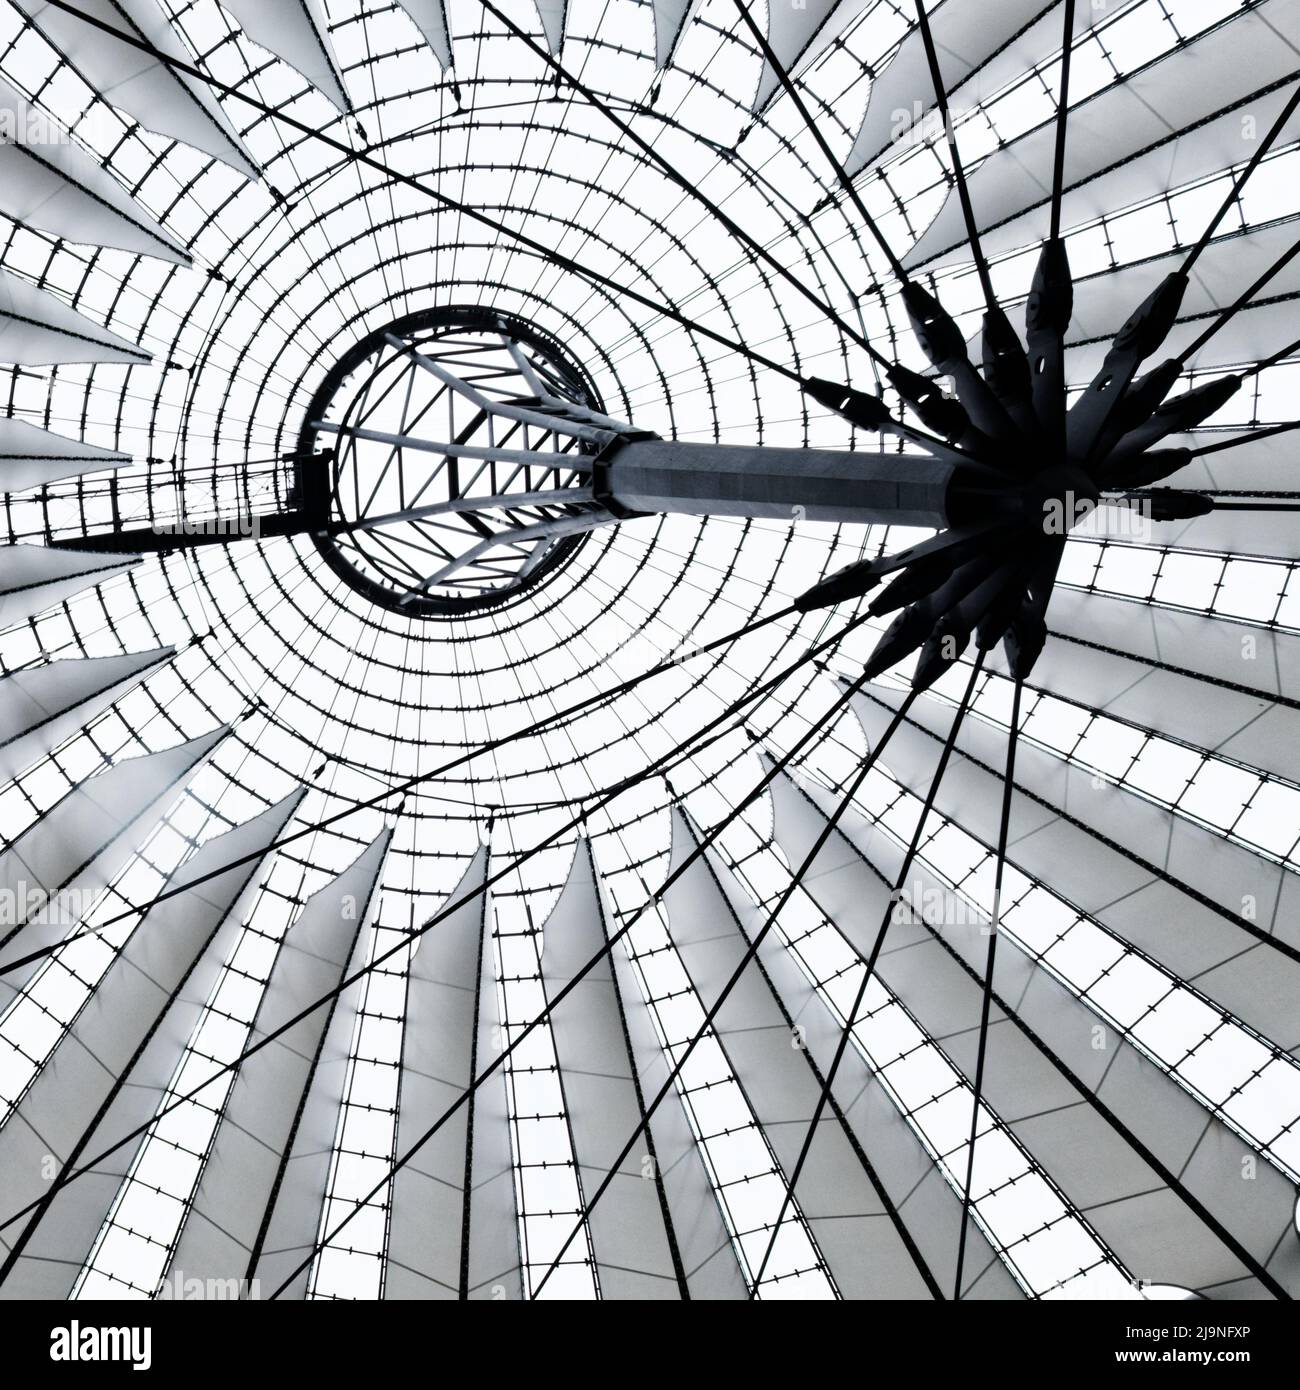 Berlin Sony Center - photo of the roofing taken during a trip to Berlin in April this year. Beautiful design and a game of contrasts. Stock Photo